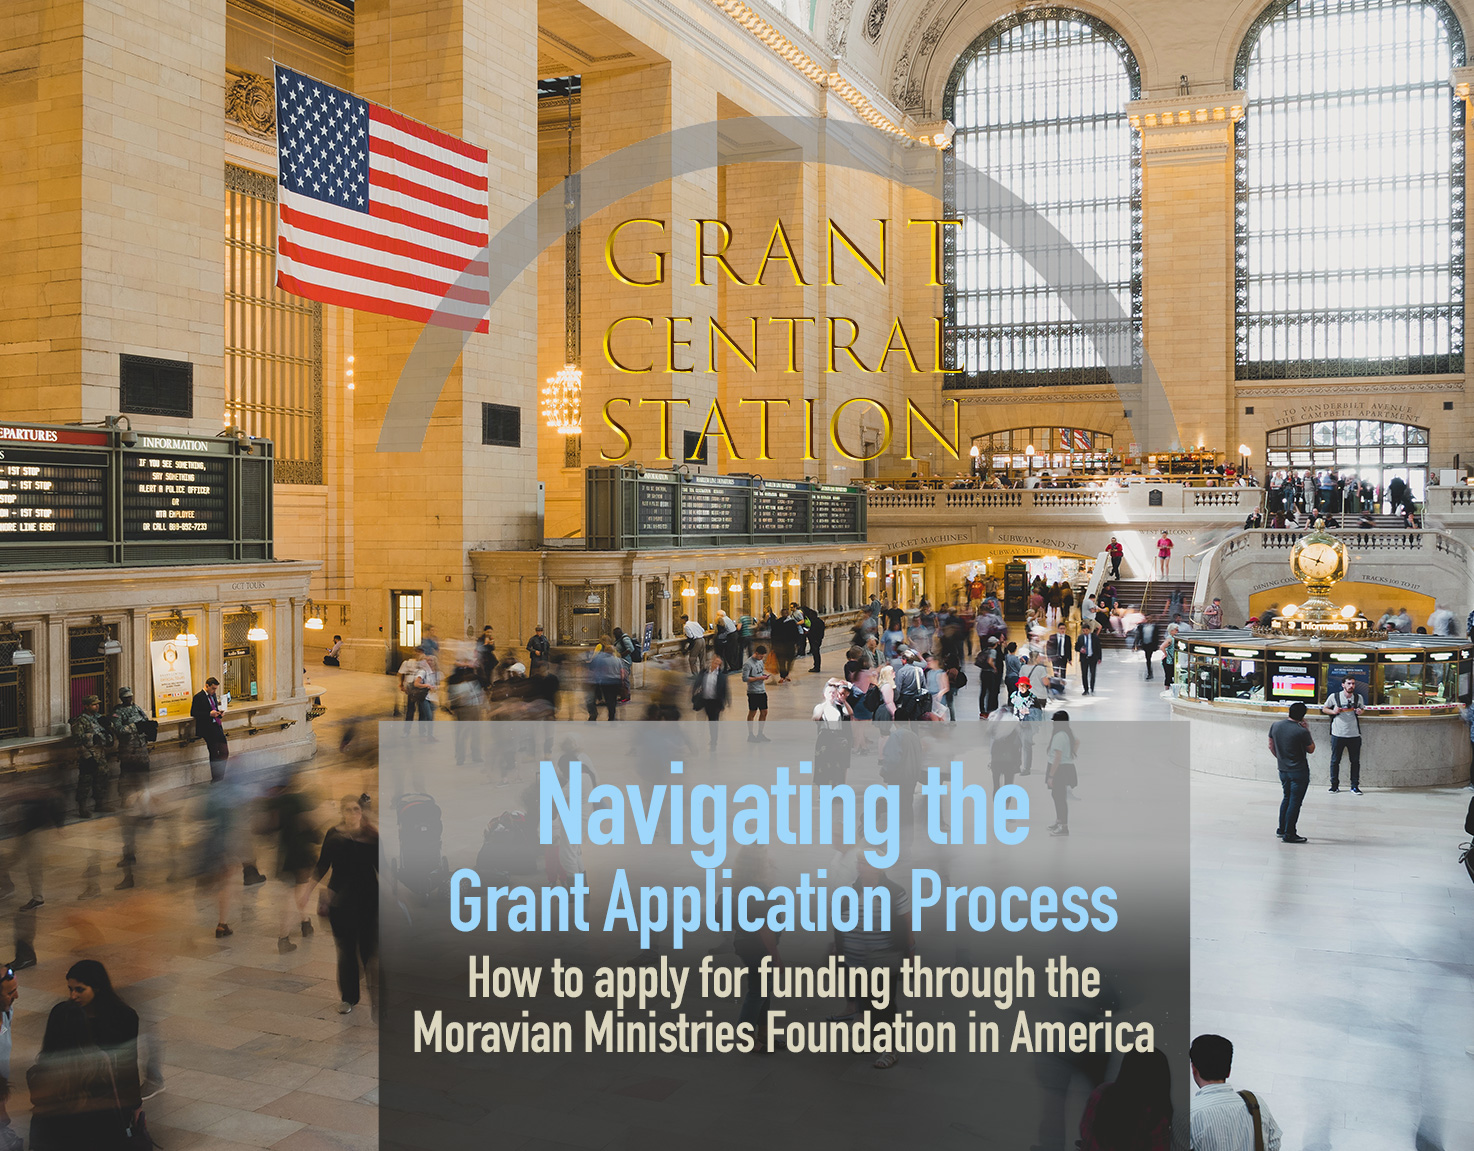 Moravian Ministries Foundation in America MMFA Navigating the Grant Application Process